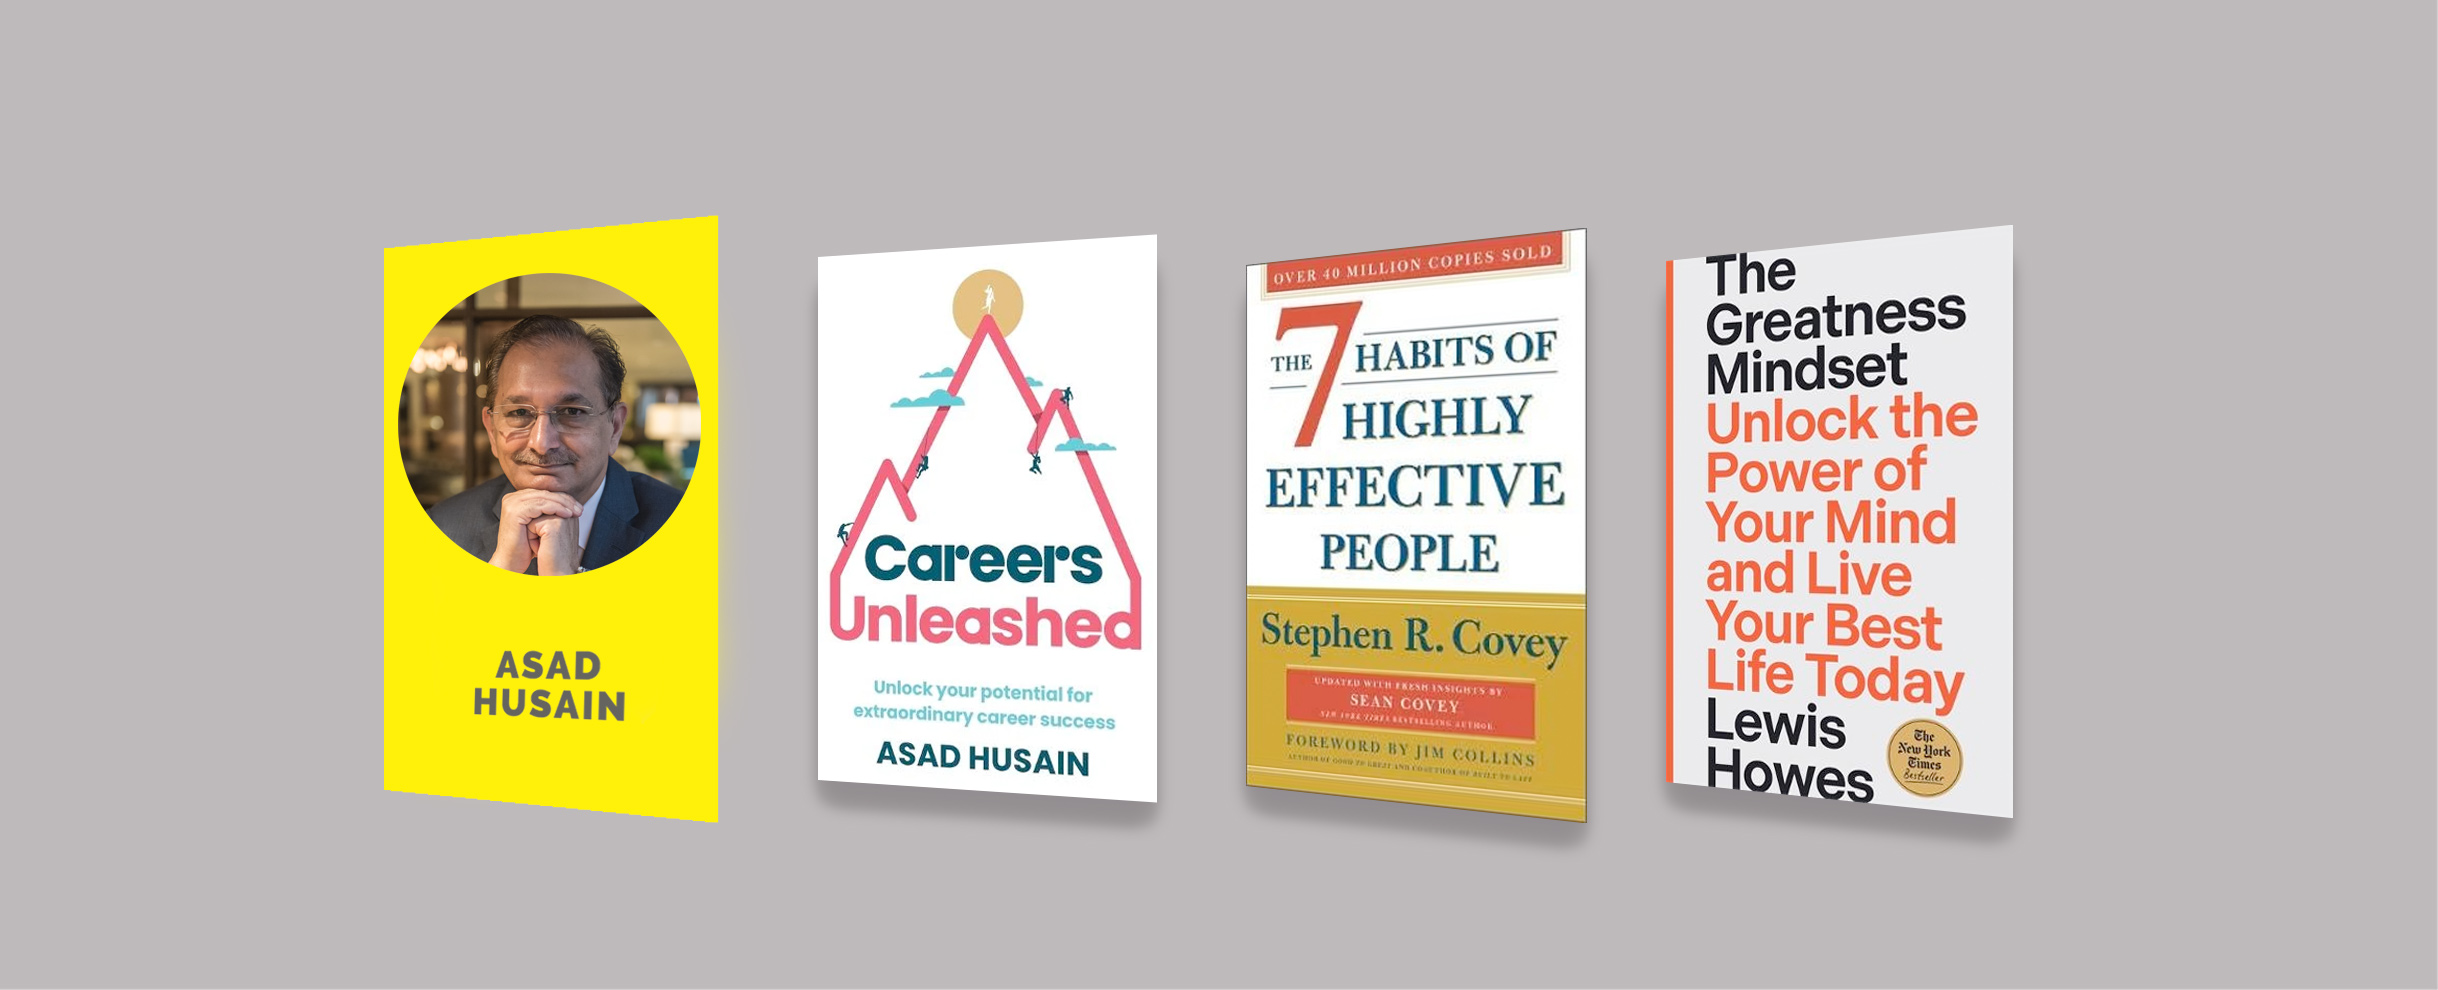 Interview with Asad Husain, author of Careers Unleashed: Unlock your potential for extraordinary career success